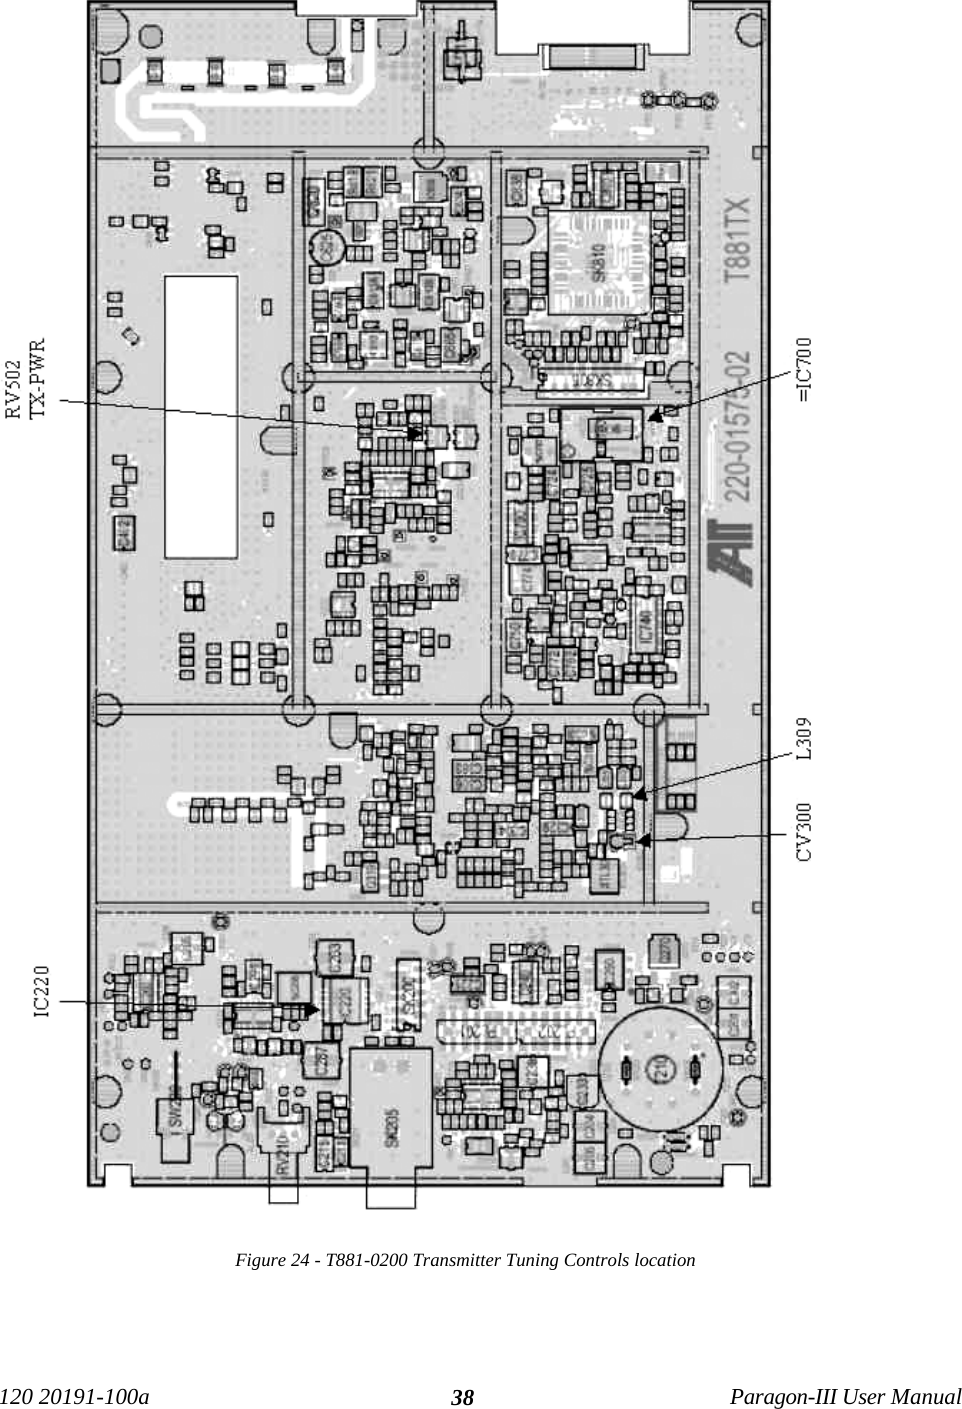 120 20191-100a Paragon-III User Manual38Figure 24 - T881-0200 Transmitter Tuning Controls location